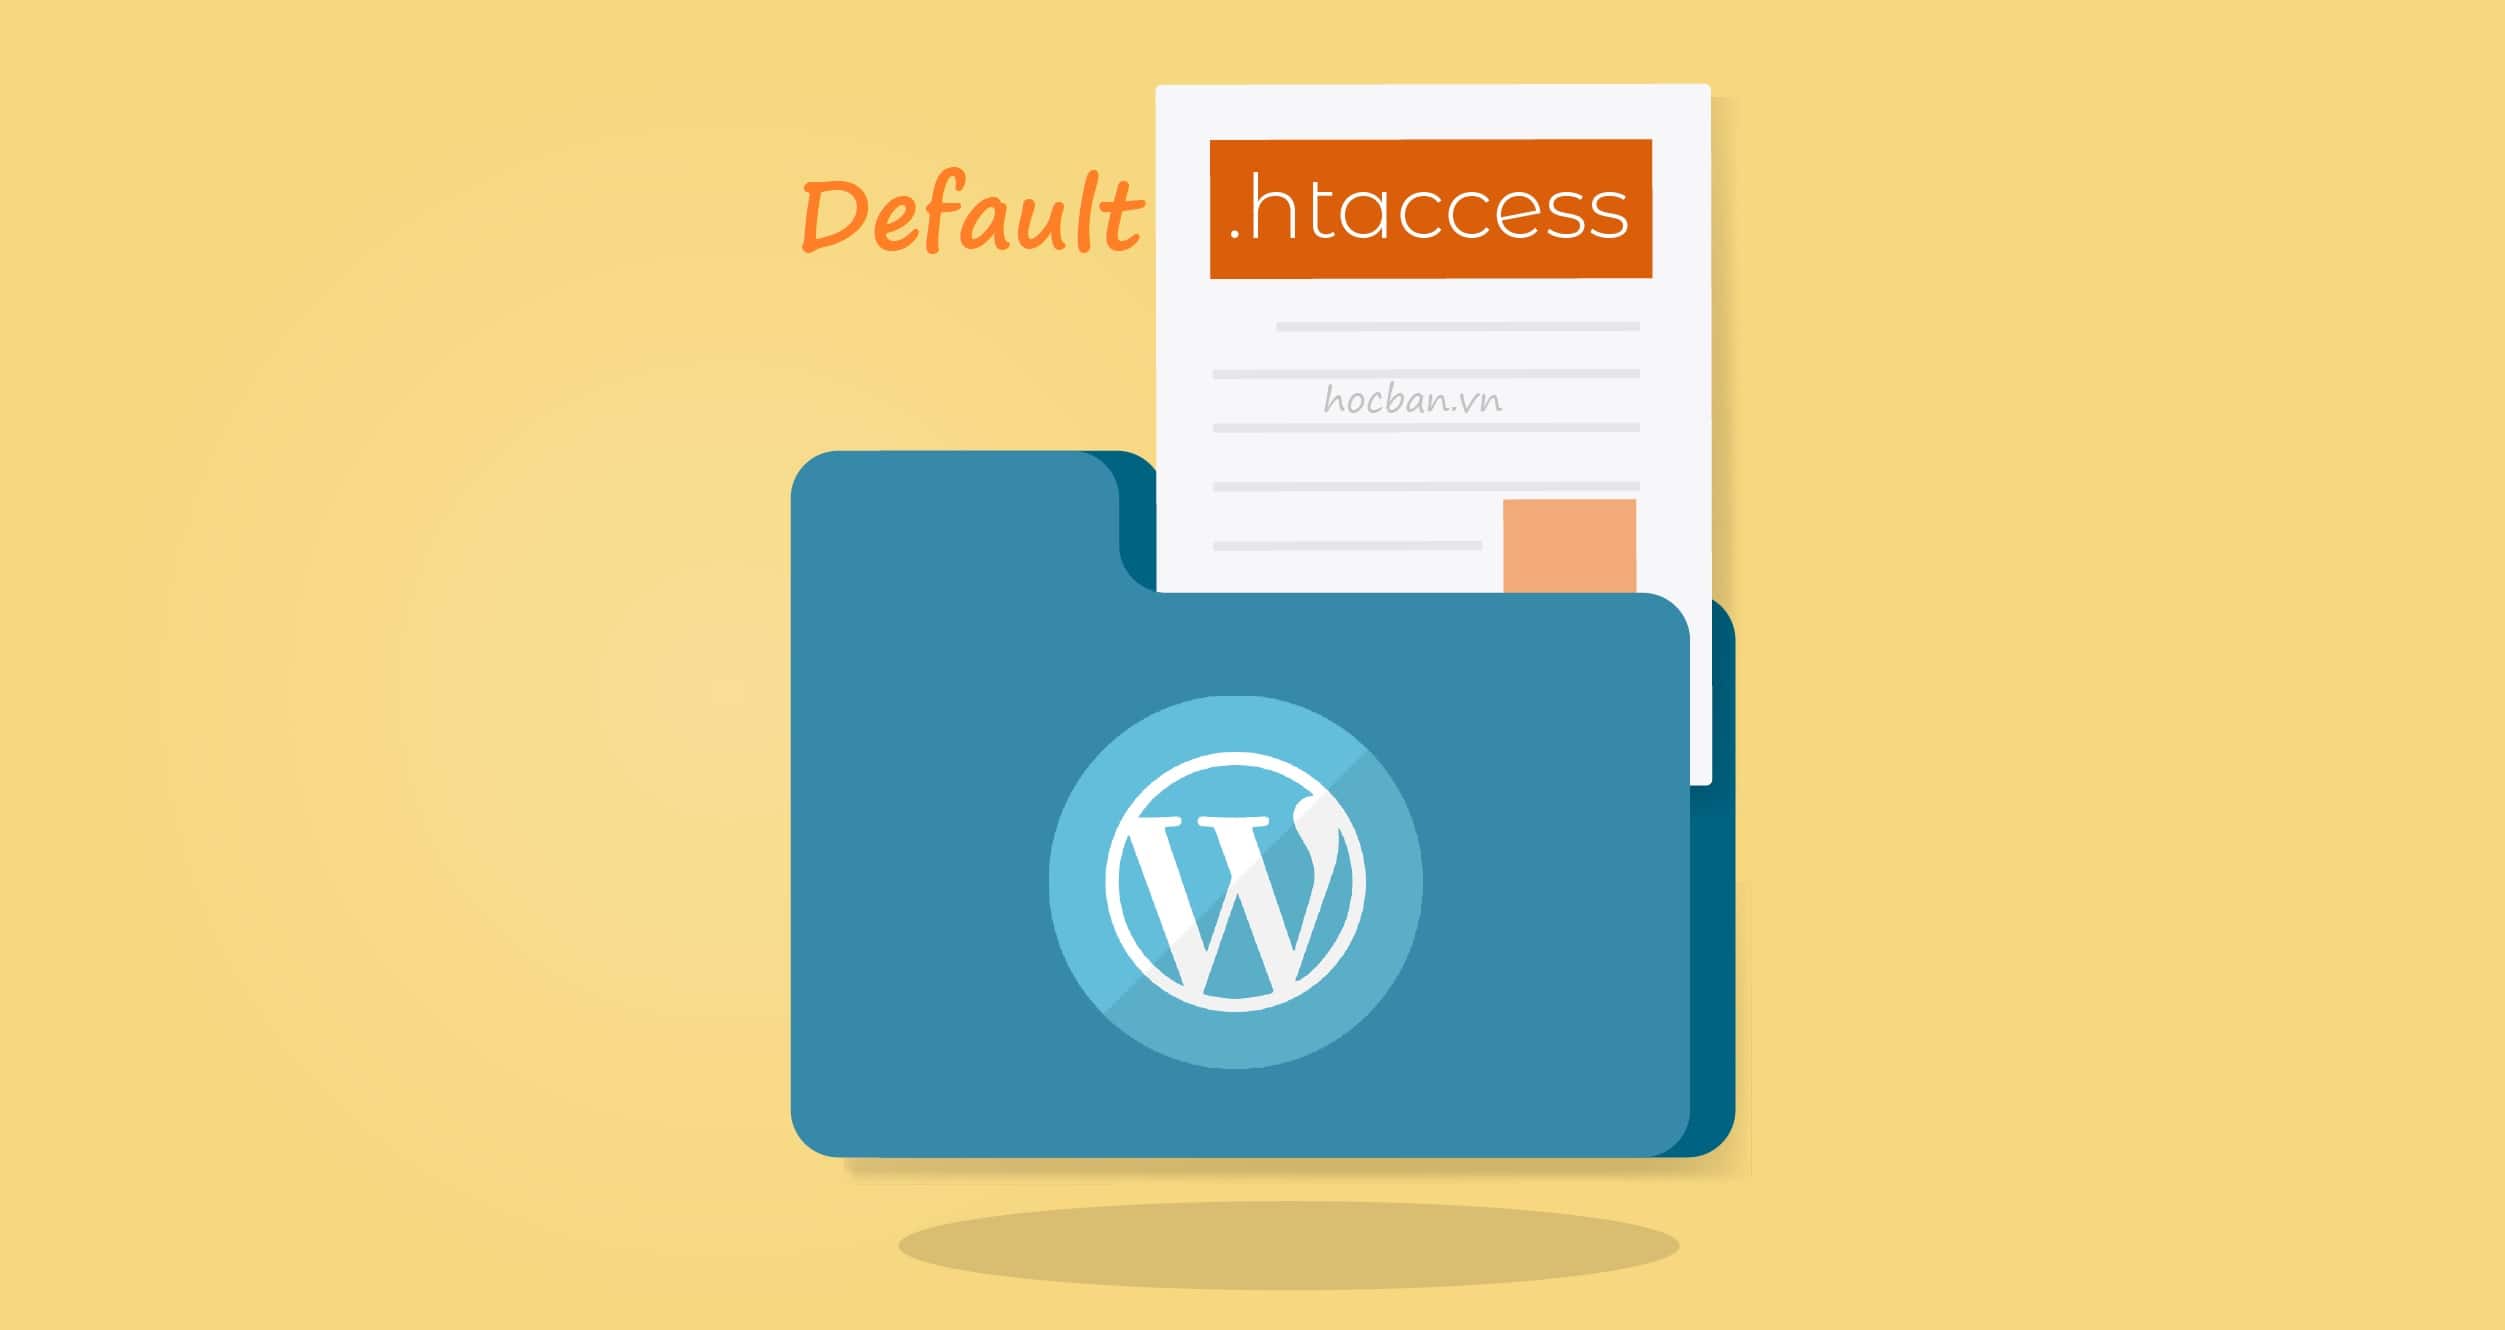  What is a wordpress htaccess file? 